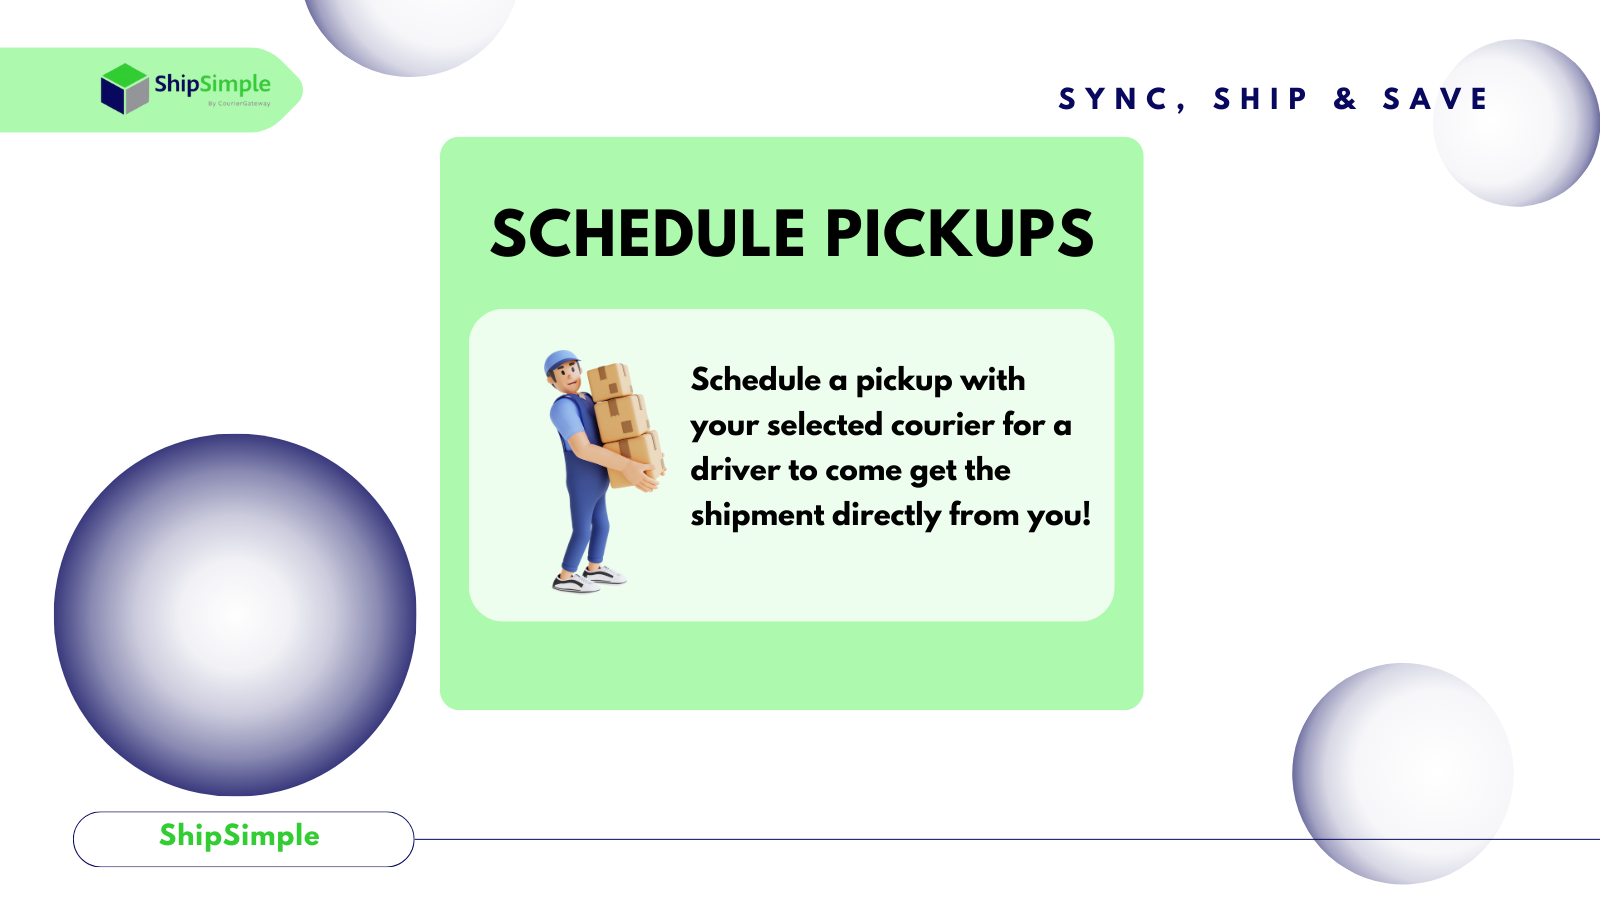 Easily schedule a pickup with the courier